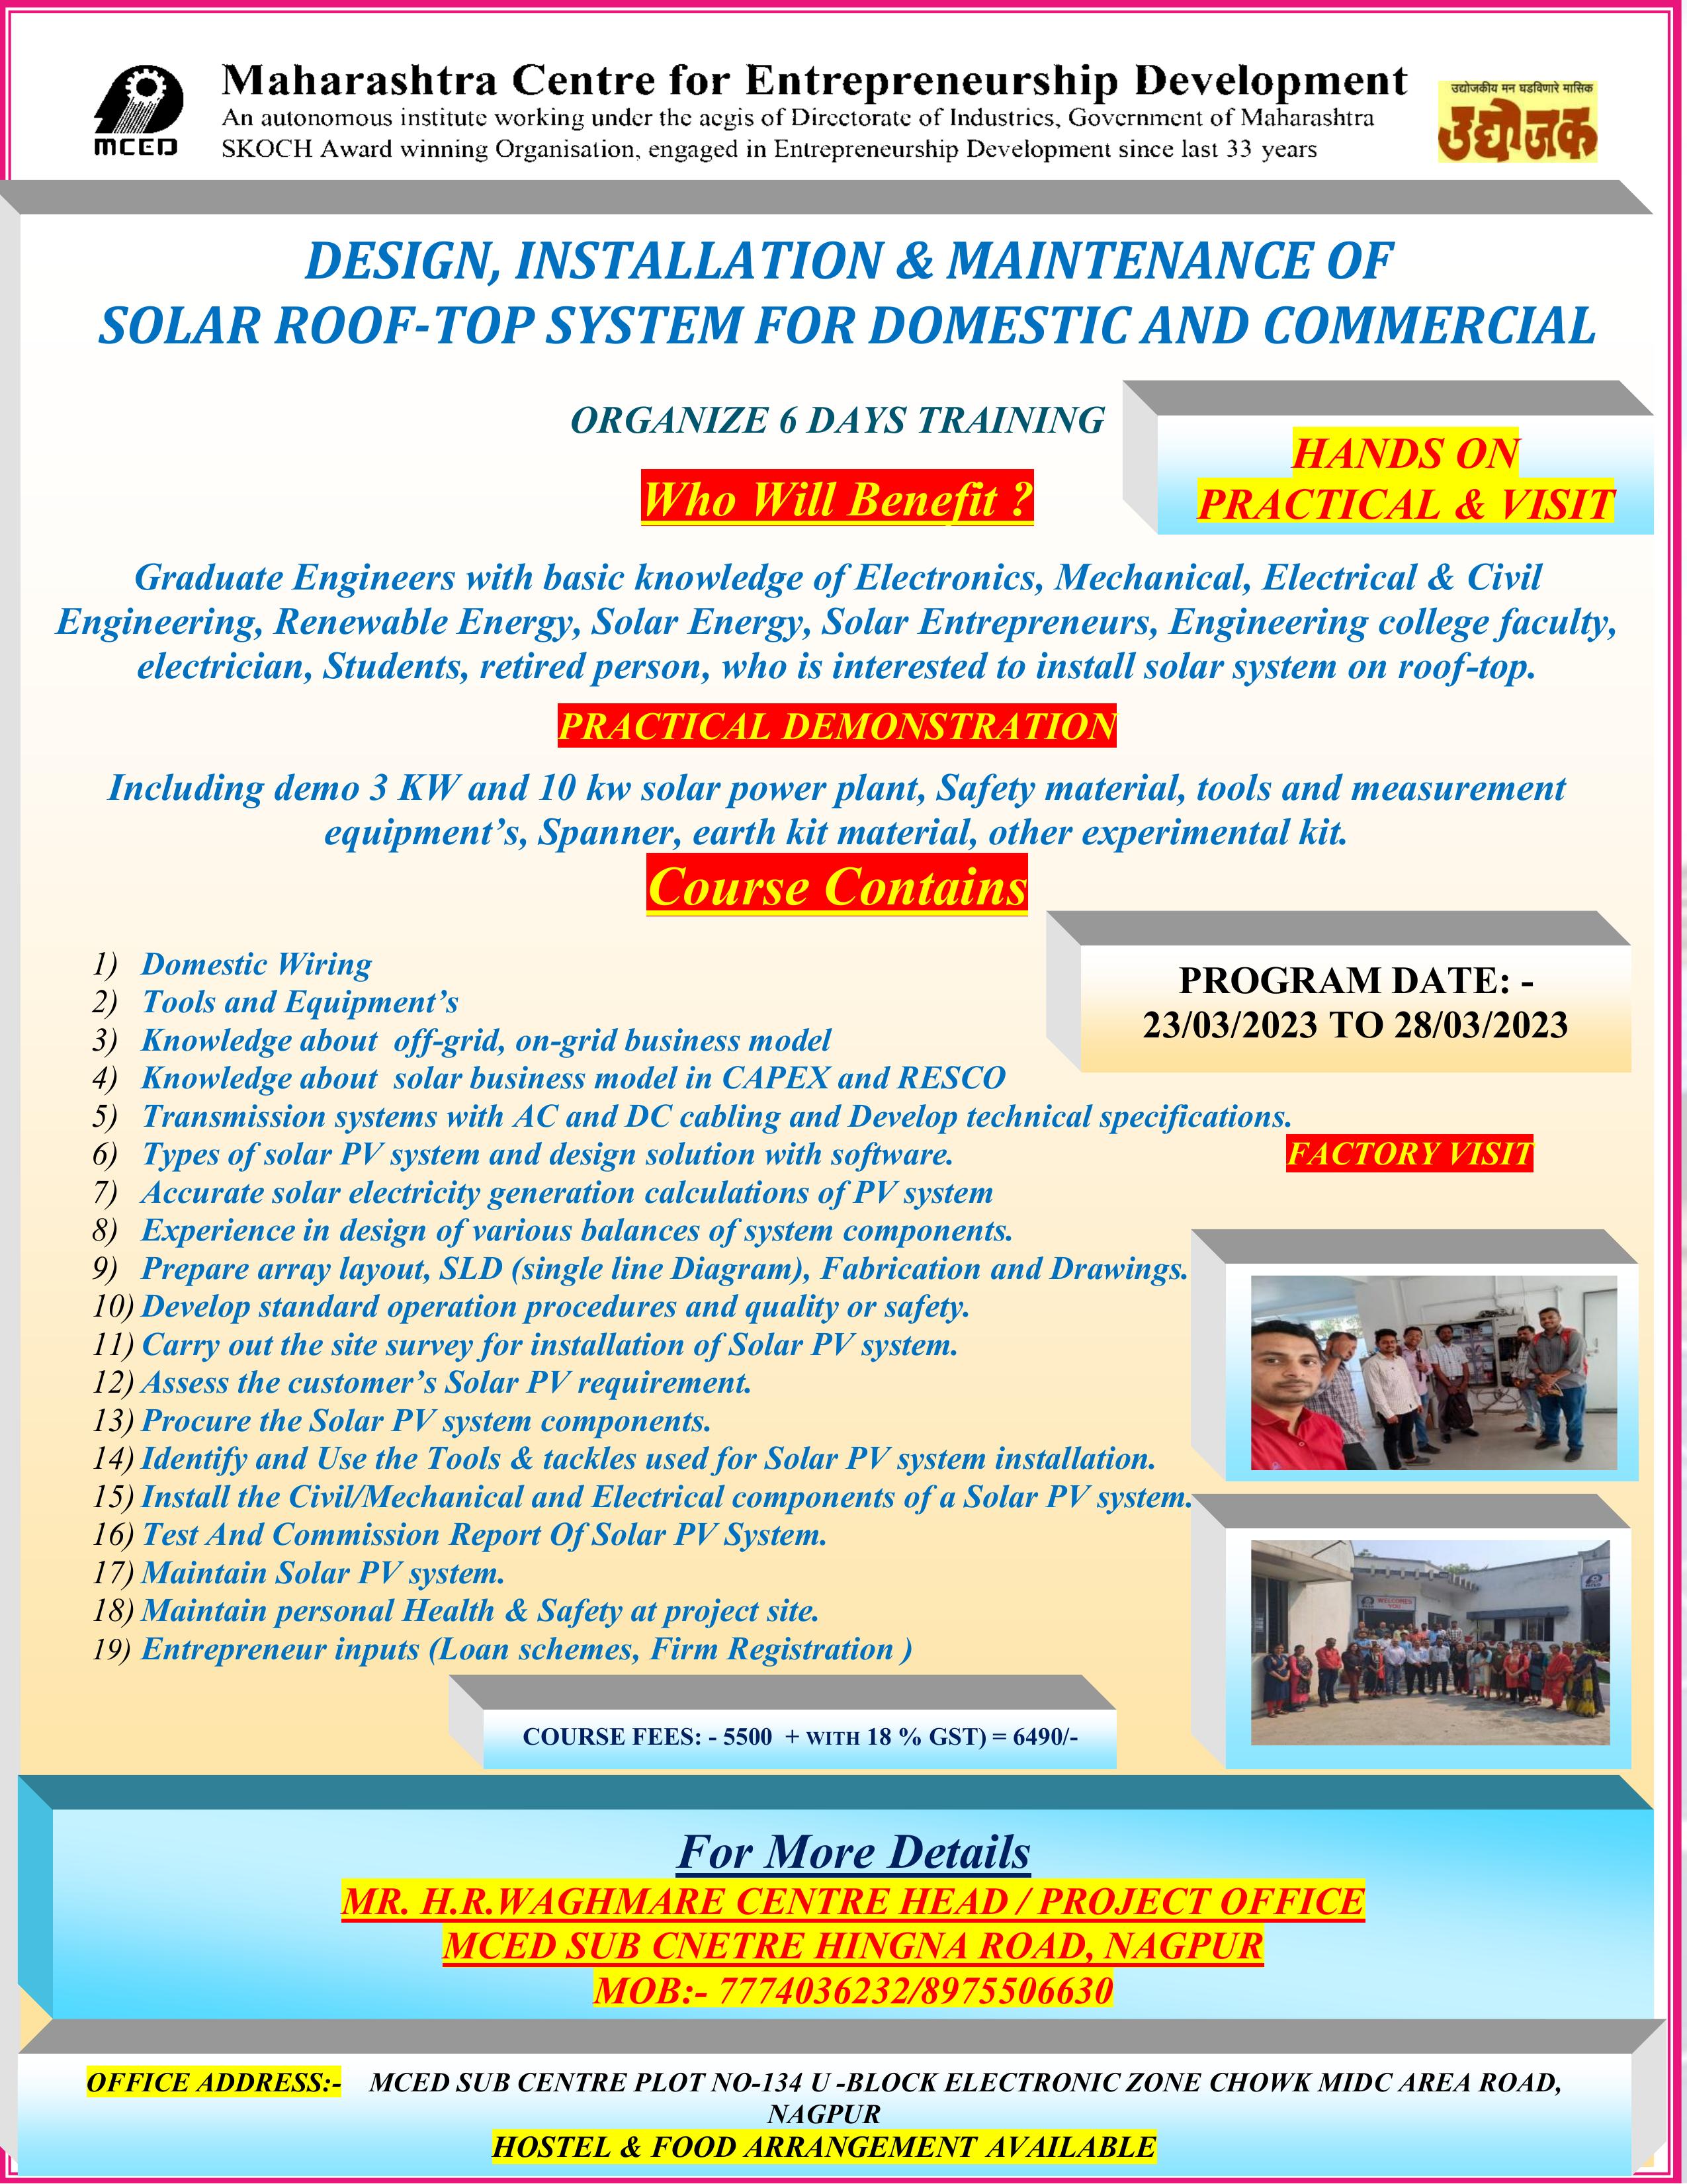 DESIGN, INSTALLATION & MAINTENANCE OF SOLAR ROOF-TOP SYSTEM, FOR DOMESTIC & COMMERCIAL